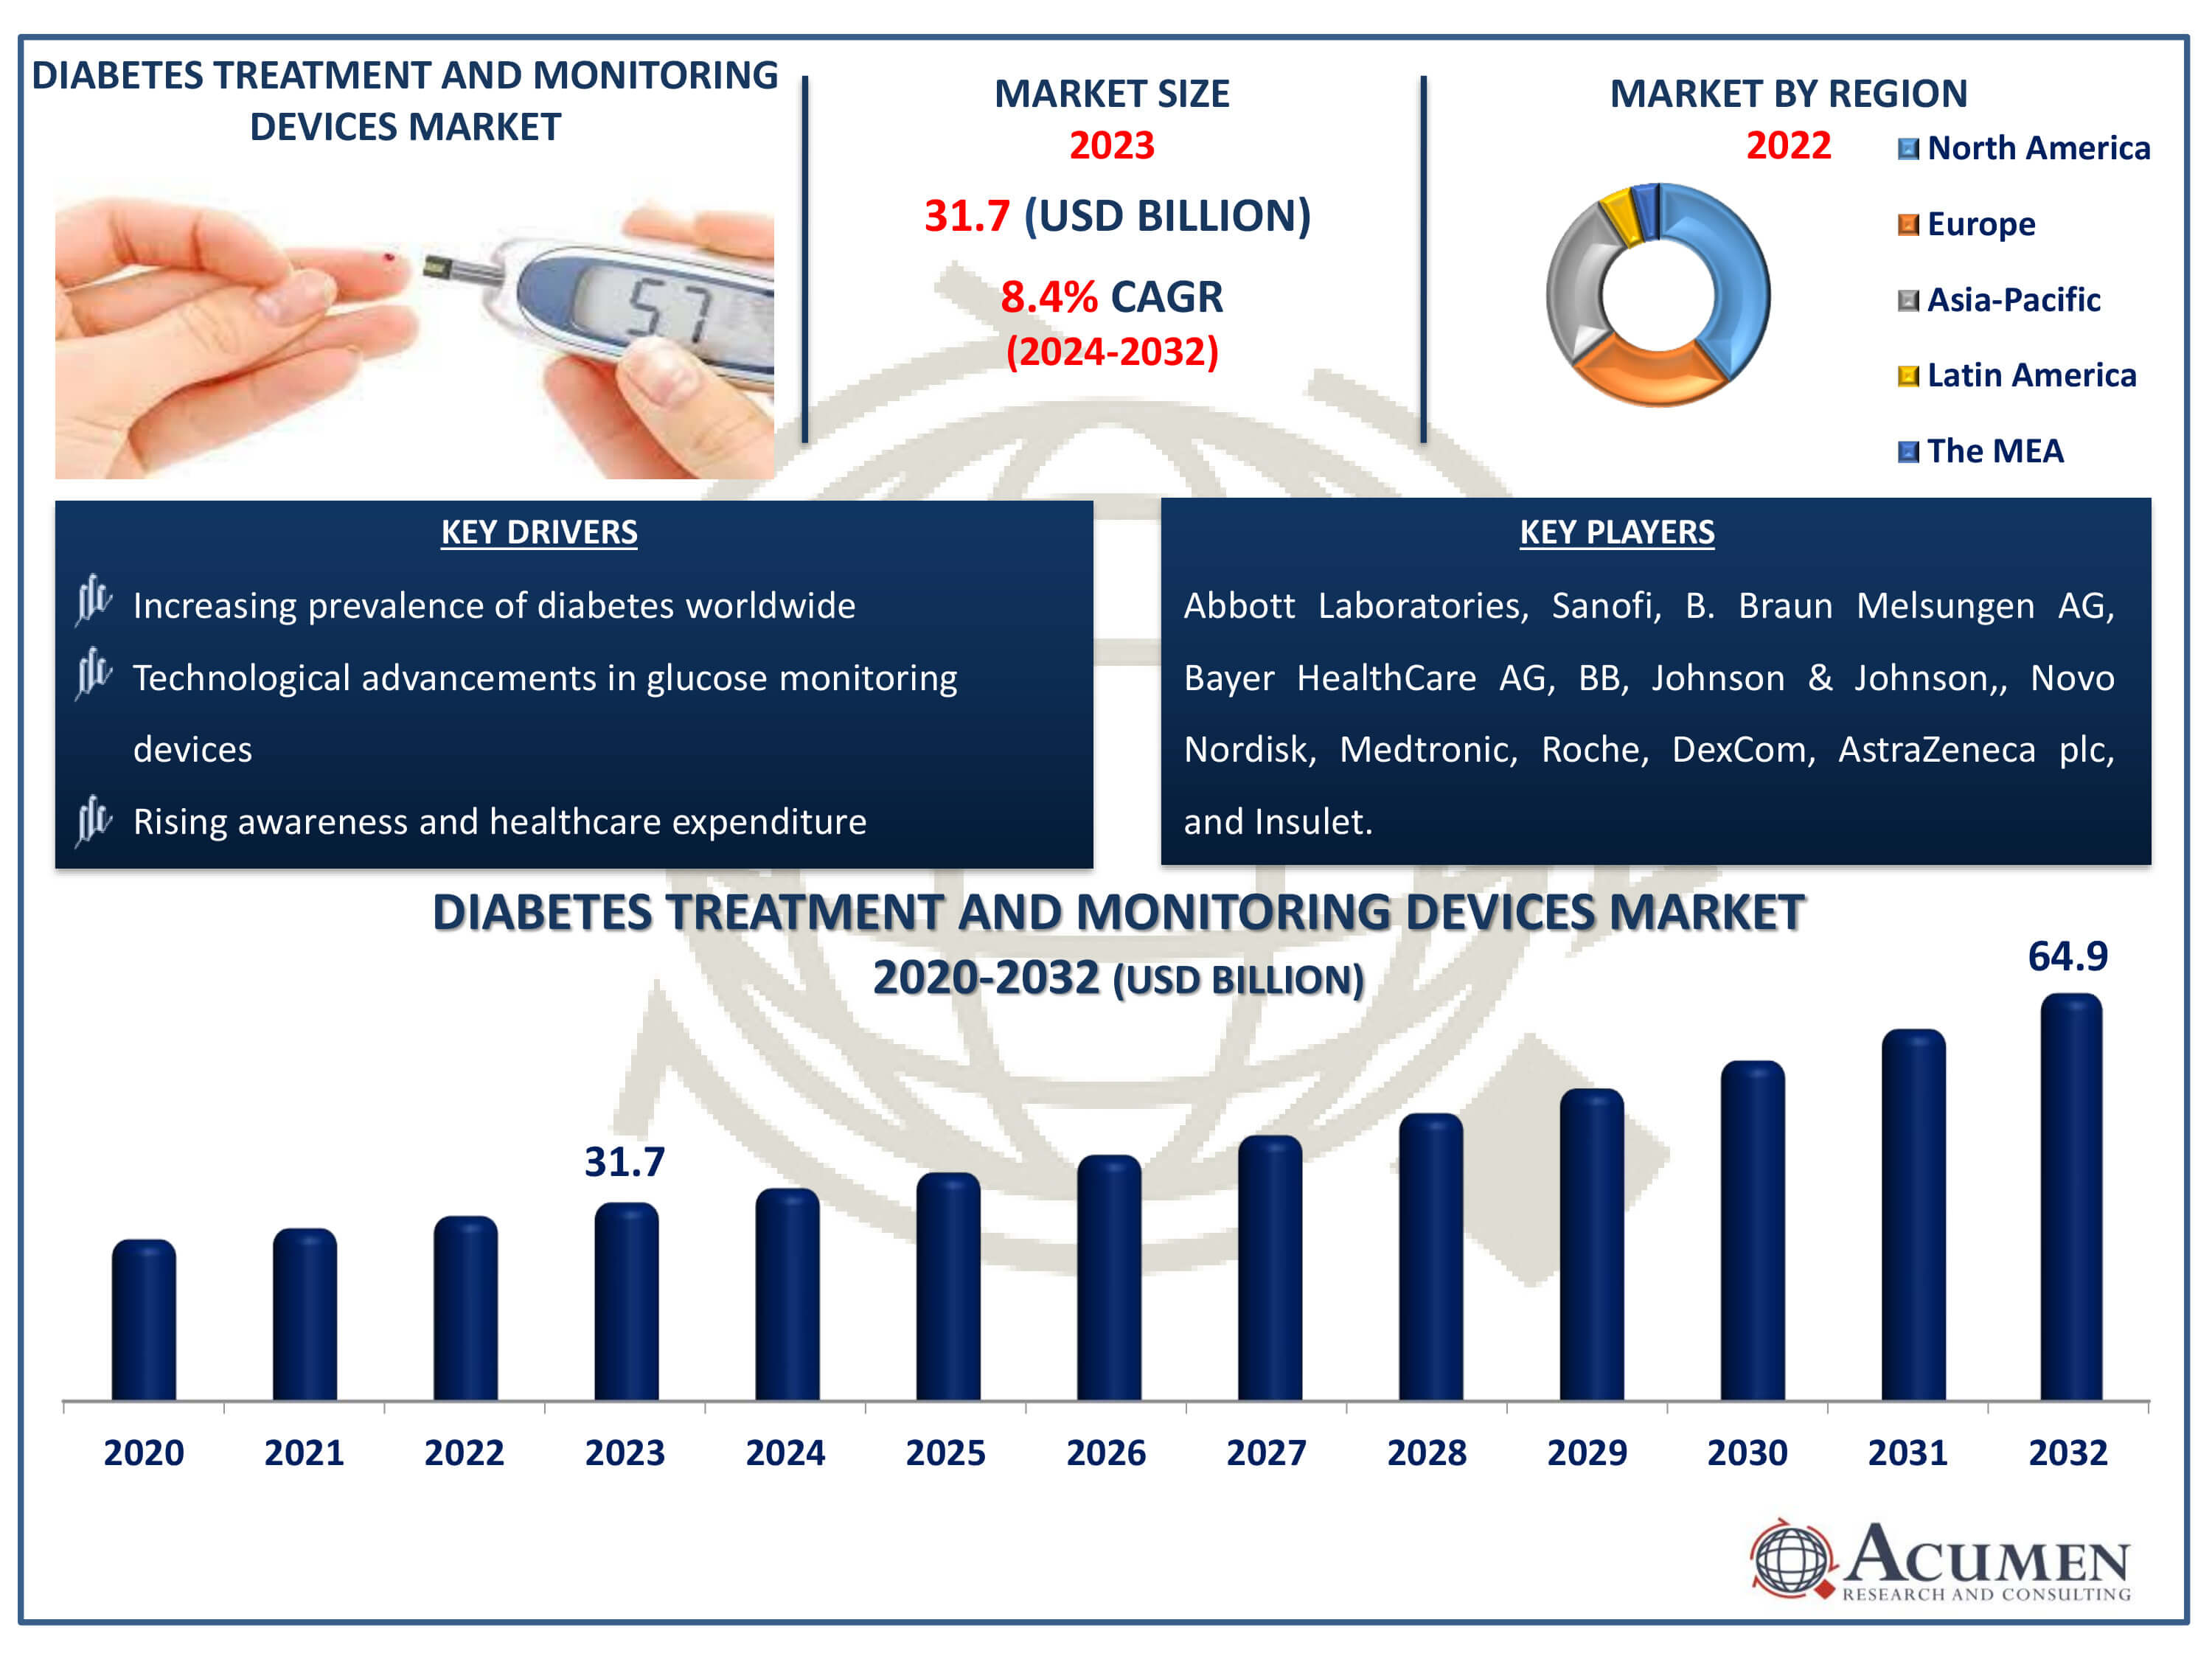 Diabetes Treatment and Monitoring Devices Market Dynamics